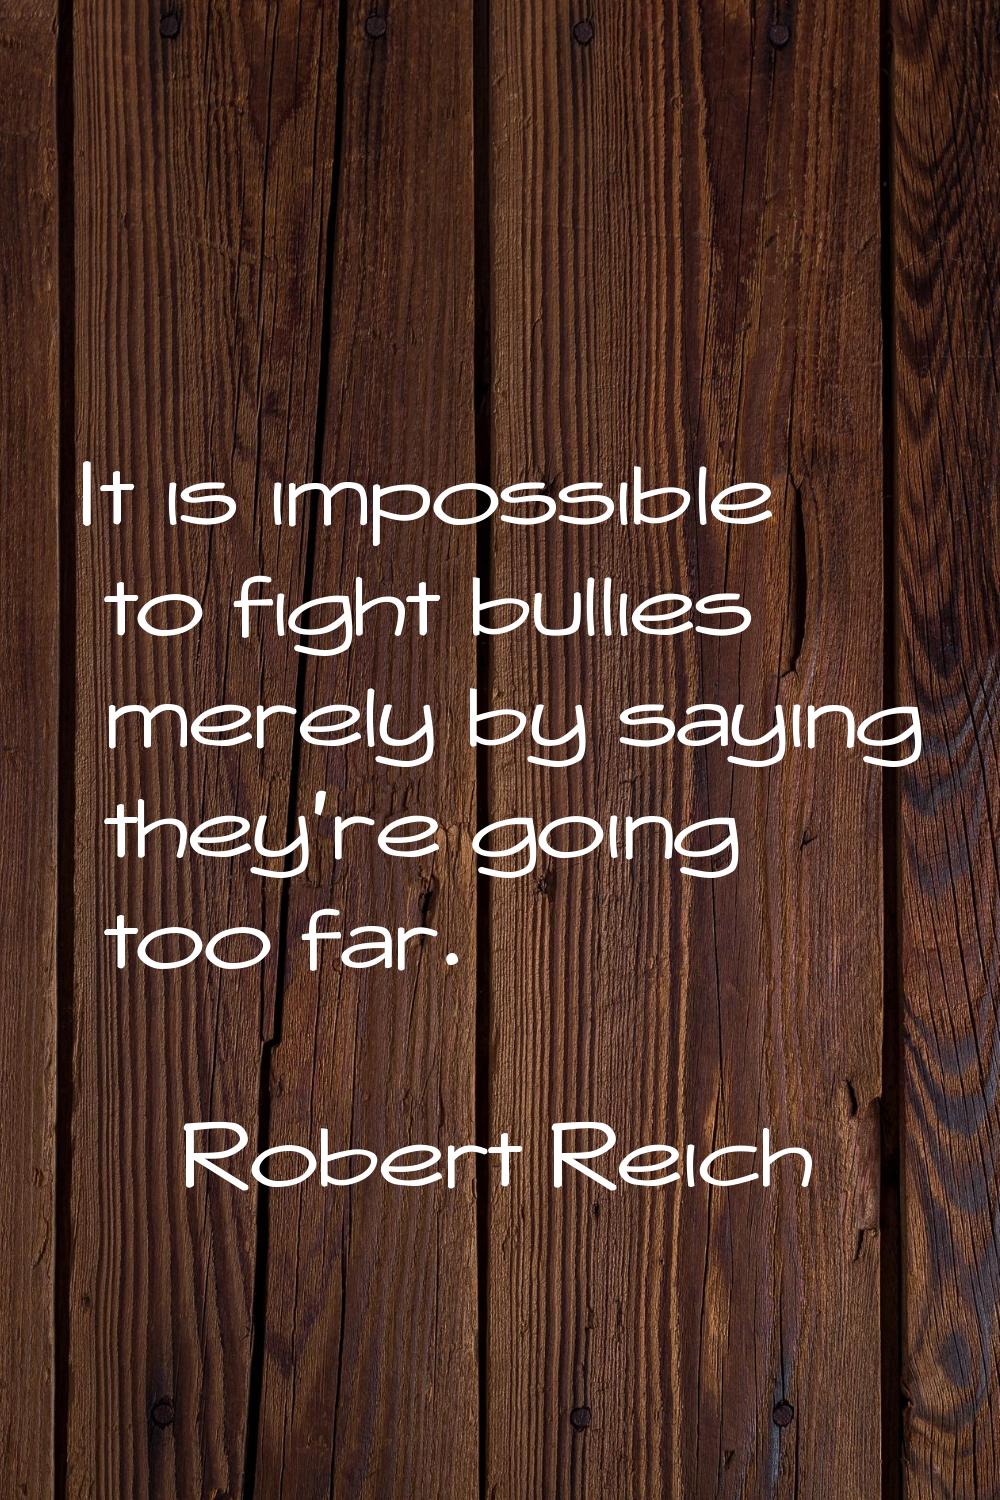 It is impossible to fight bullies merely by saying they're going too far.